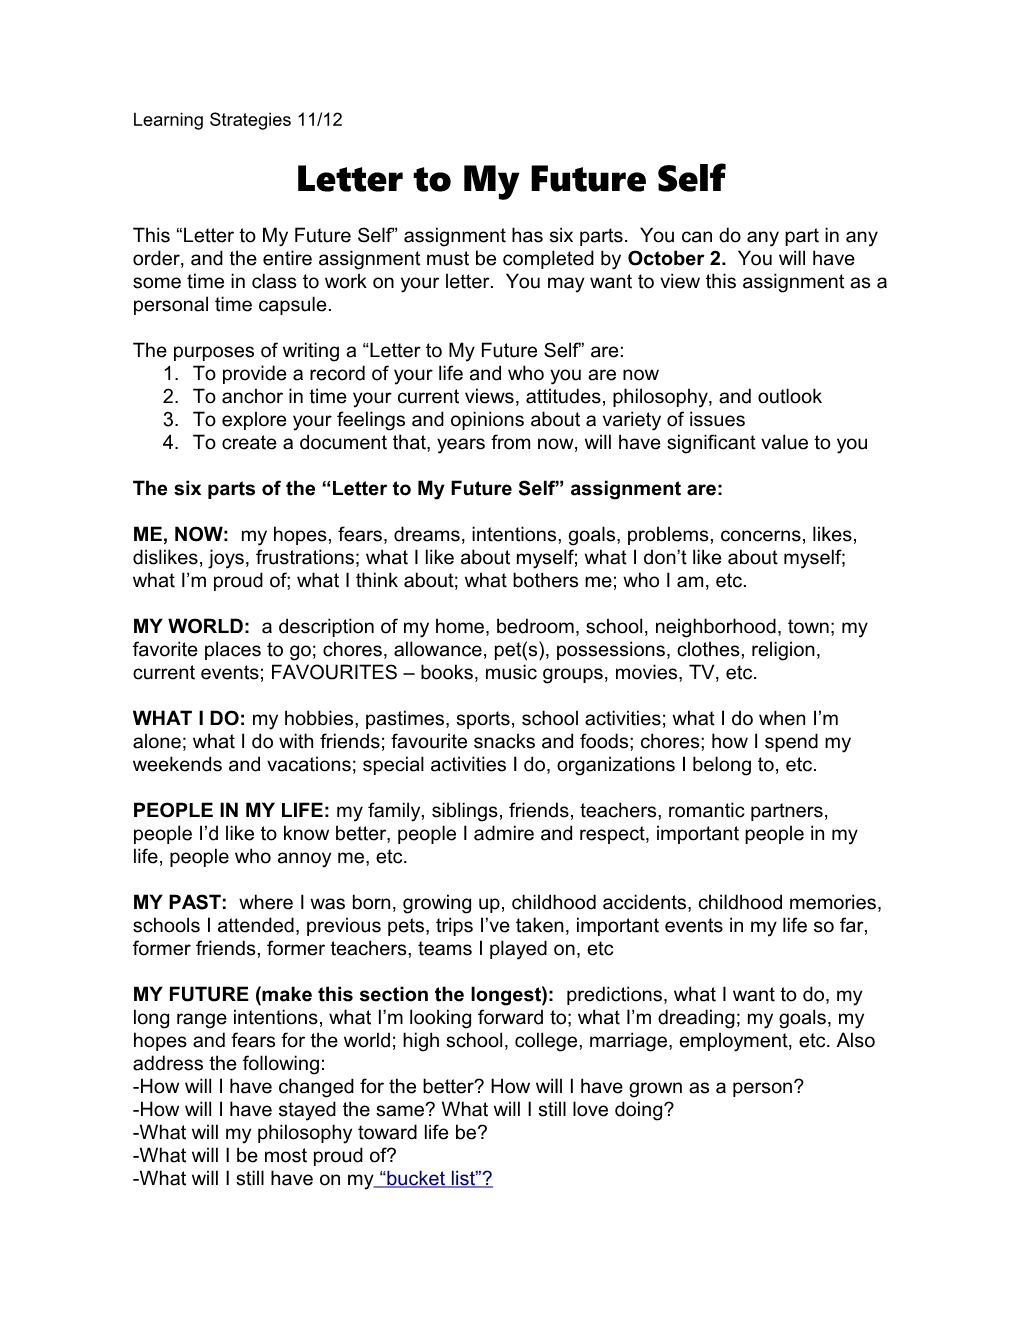 Letter to Self Assignment Sheet